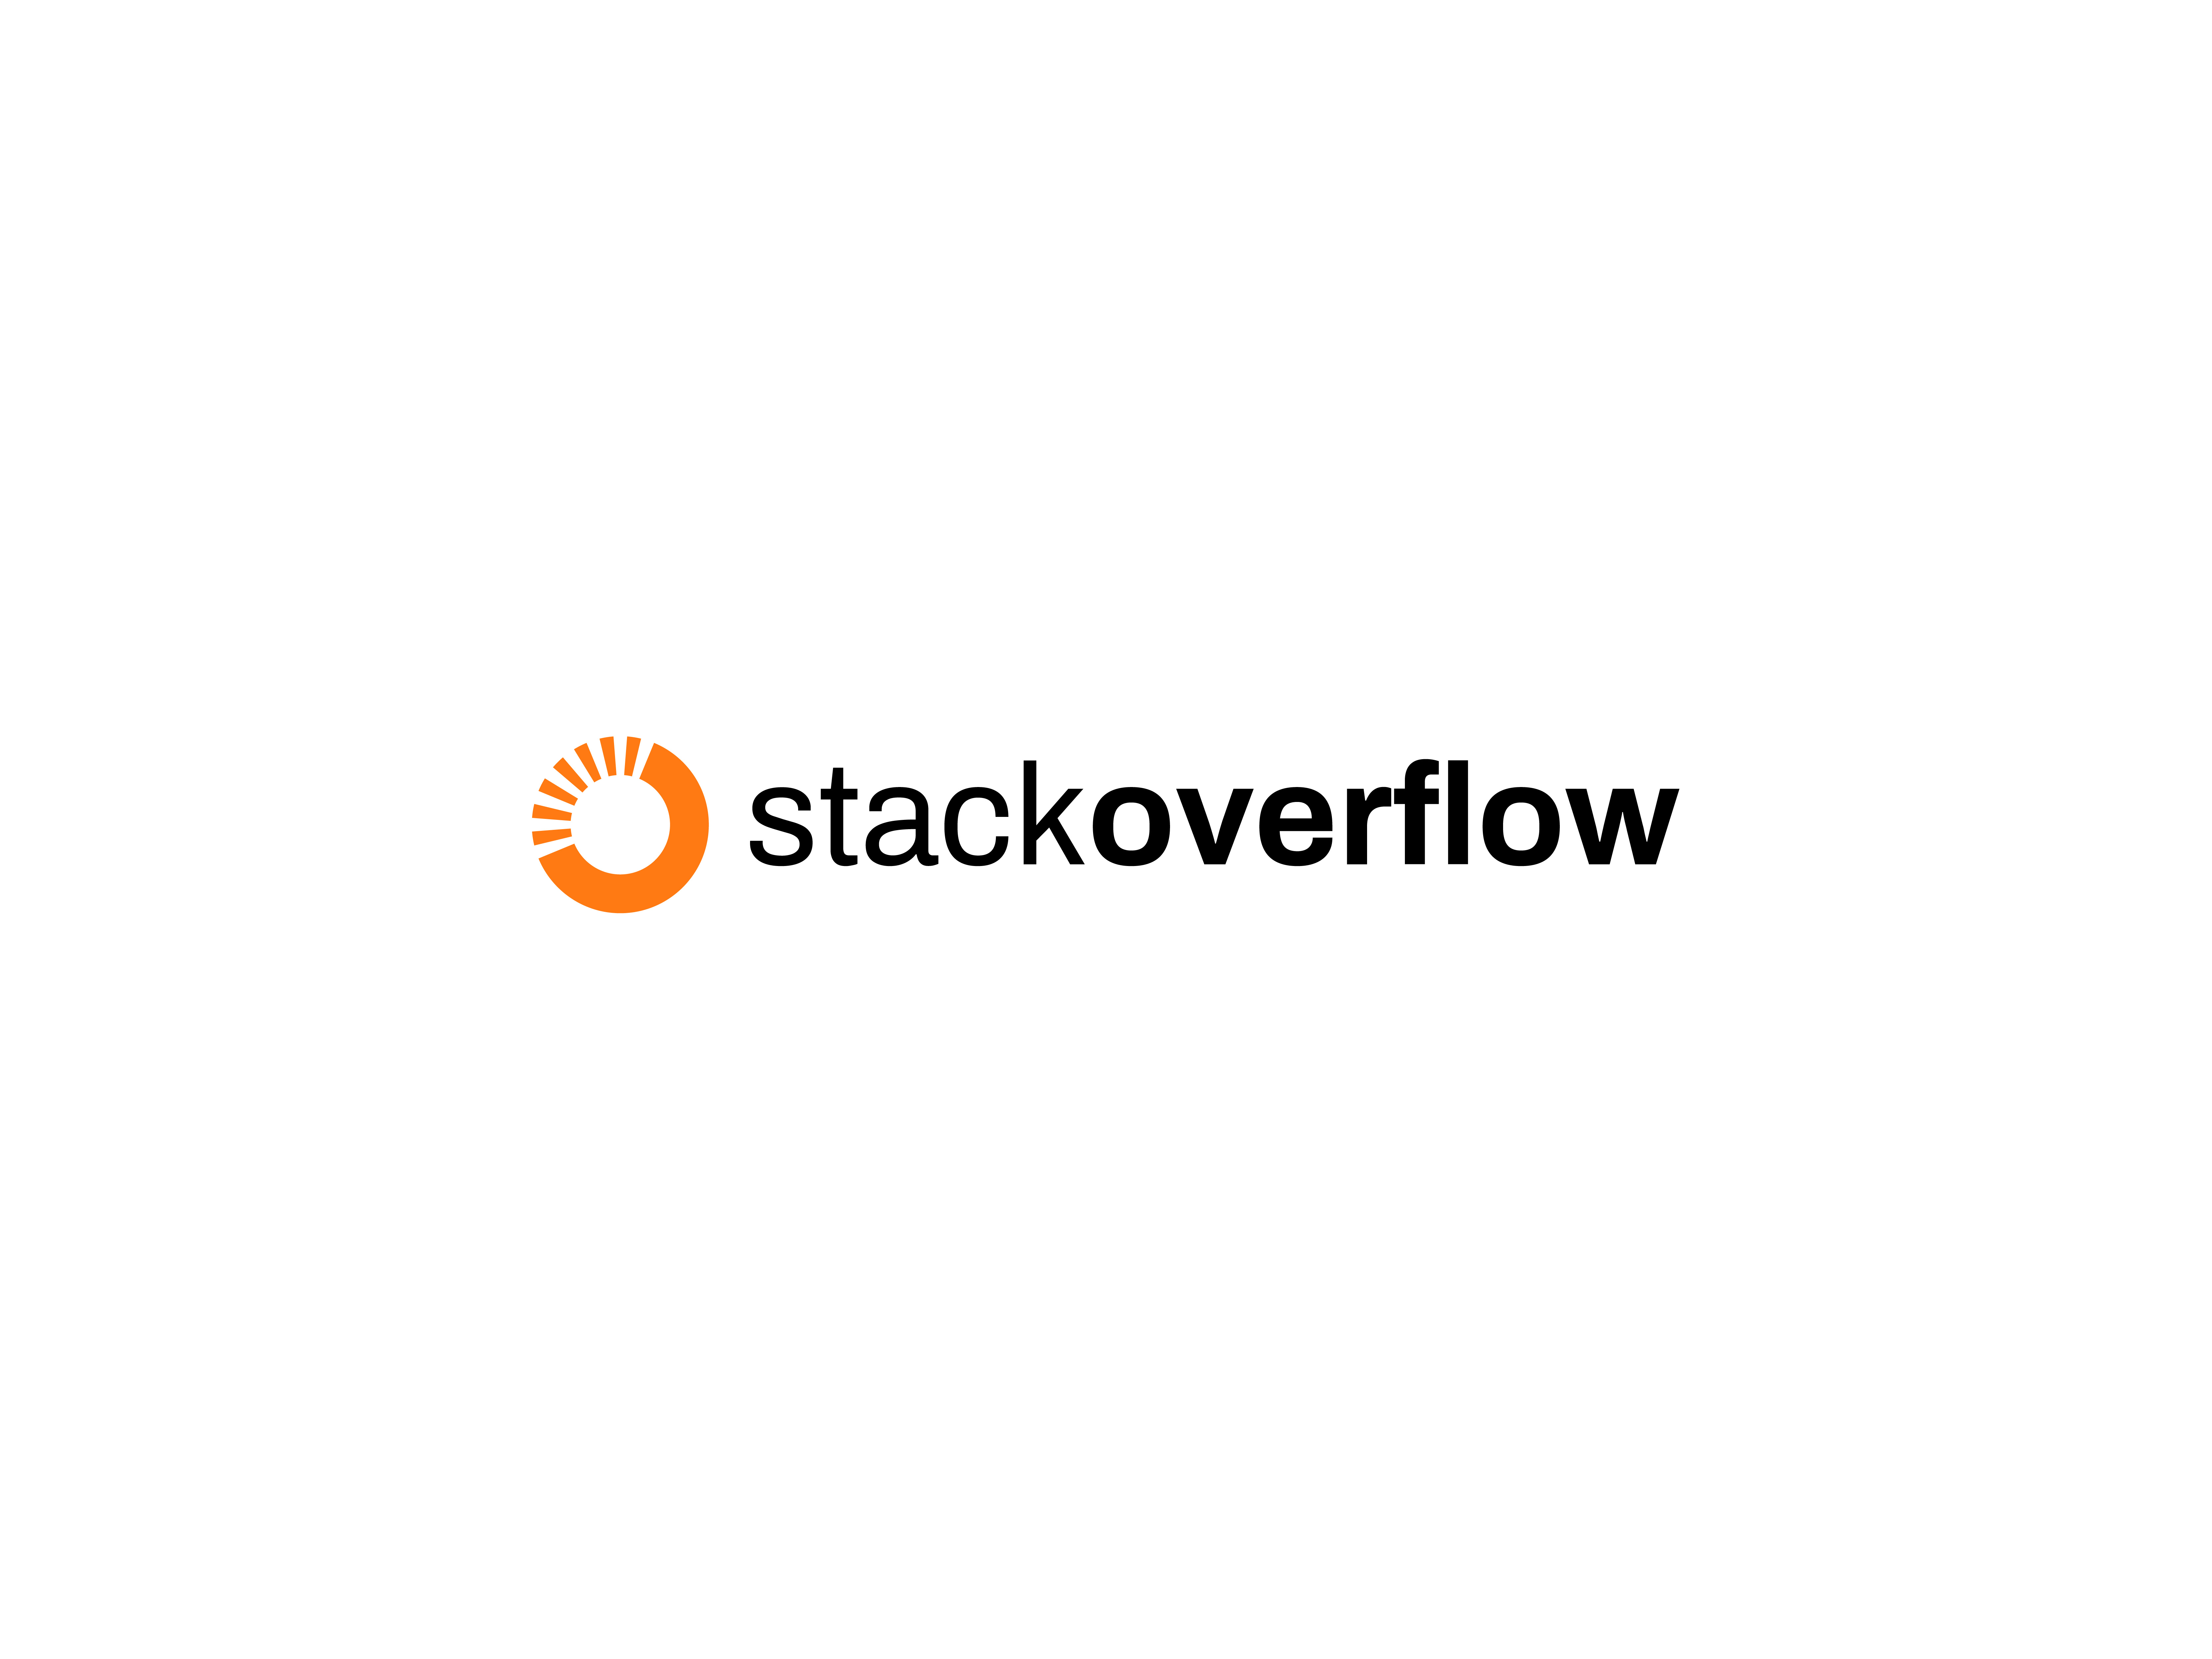 stack overflow redesign by Masum Billah on Dribbble